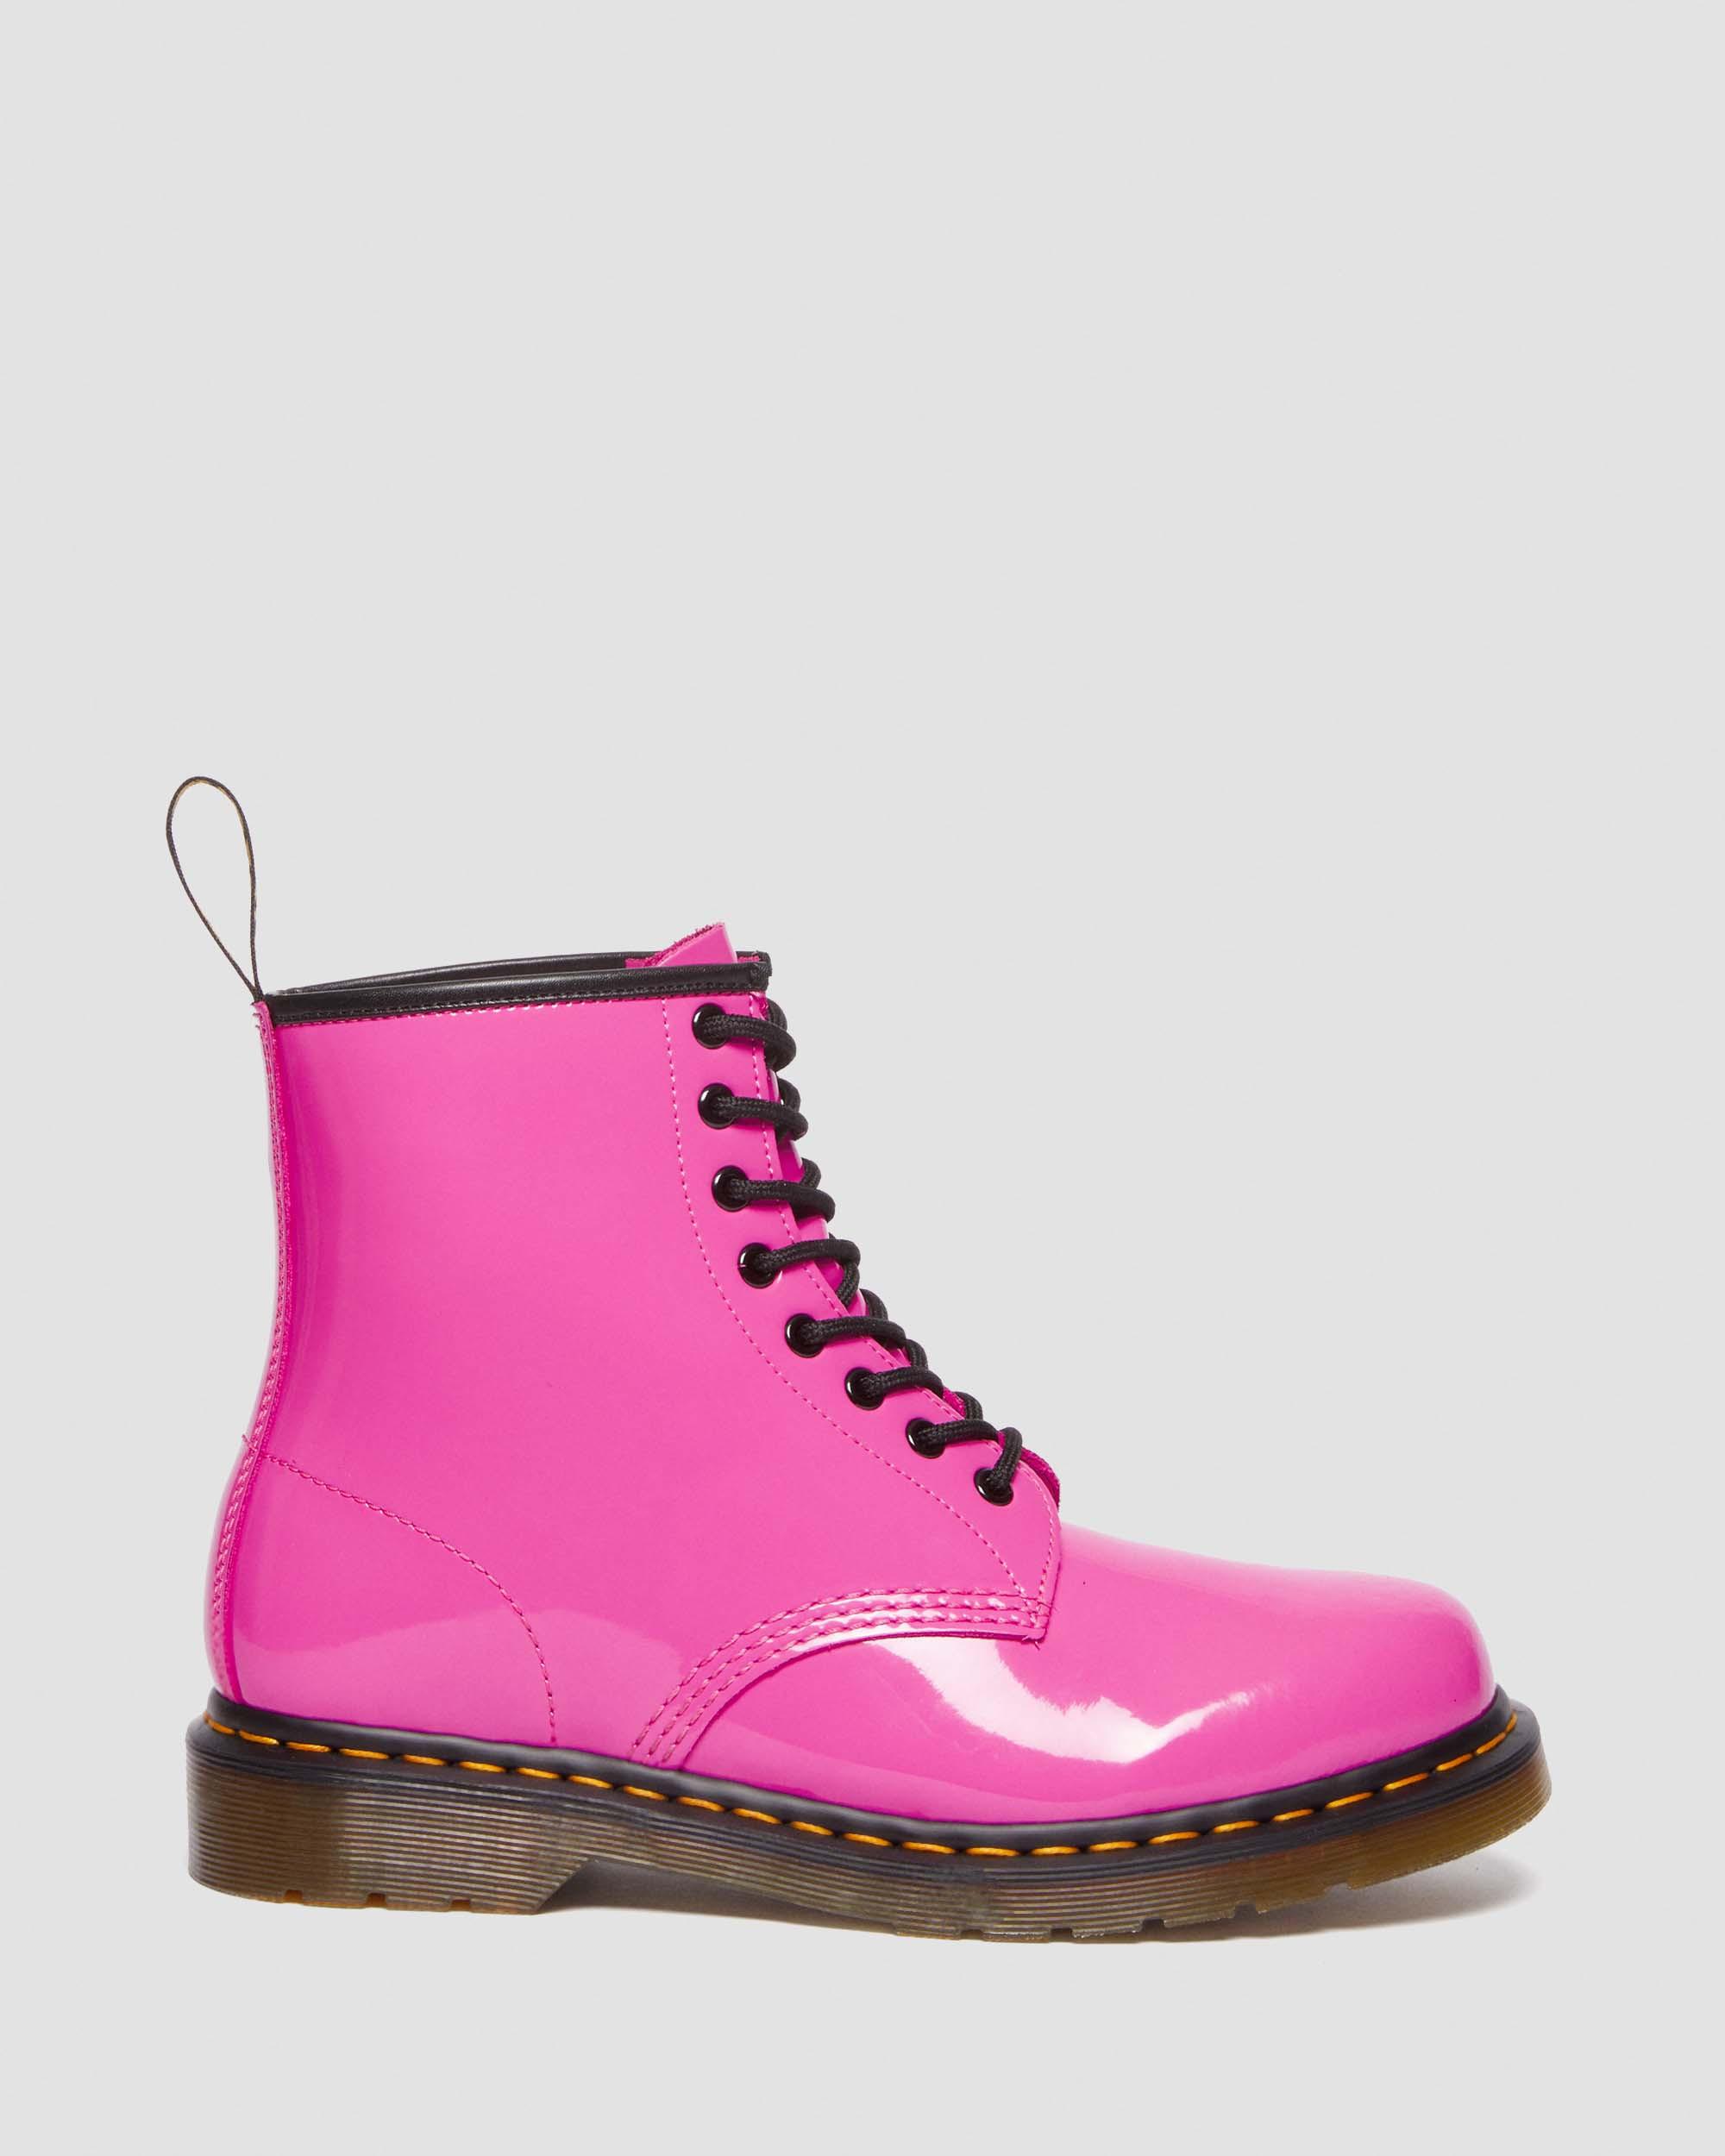 How to Clean Patent Leather Dr. Martens